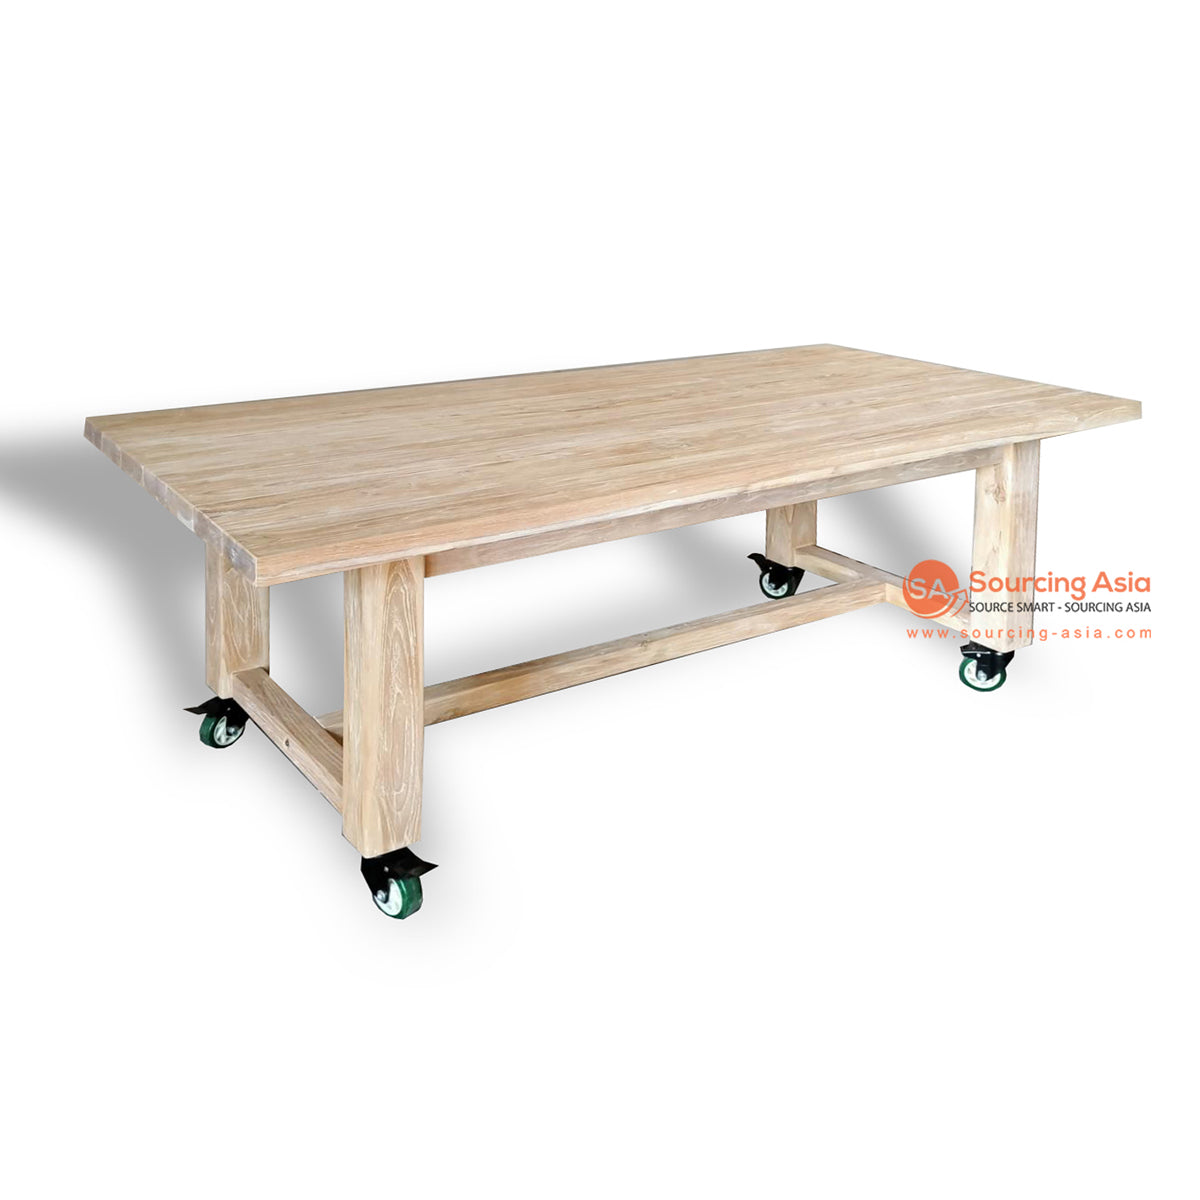 ECL260 WHITE WASH SOLID RECYCLED TEAK WOOD DINING TABLE WITH ADDED WHEELS